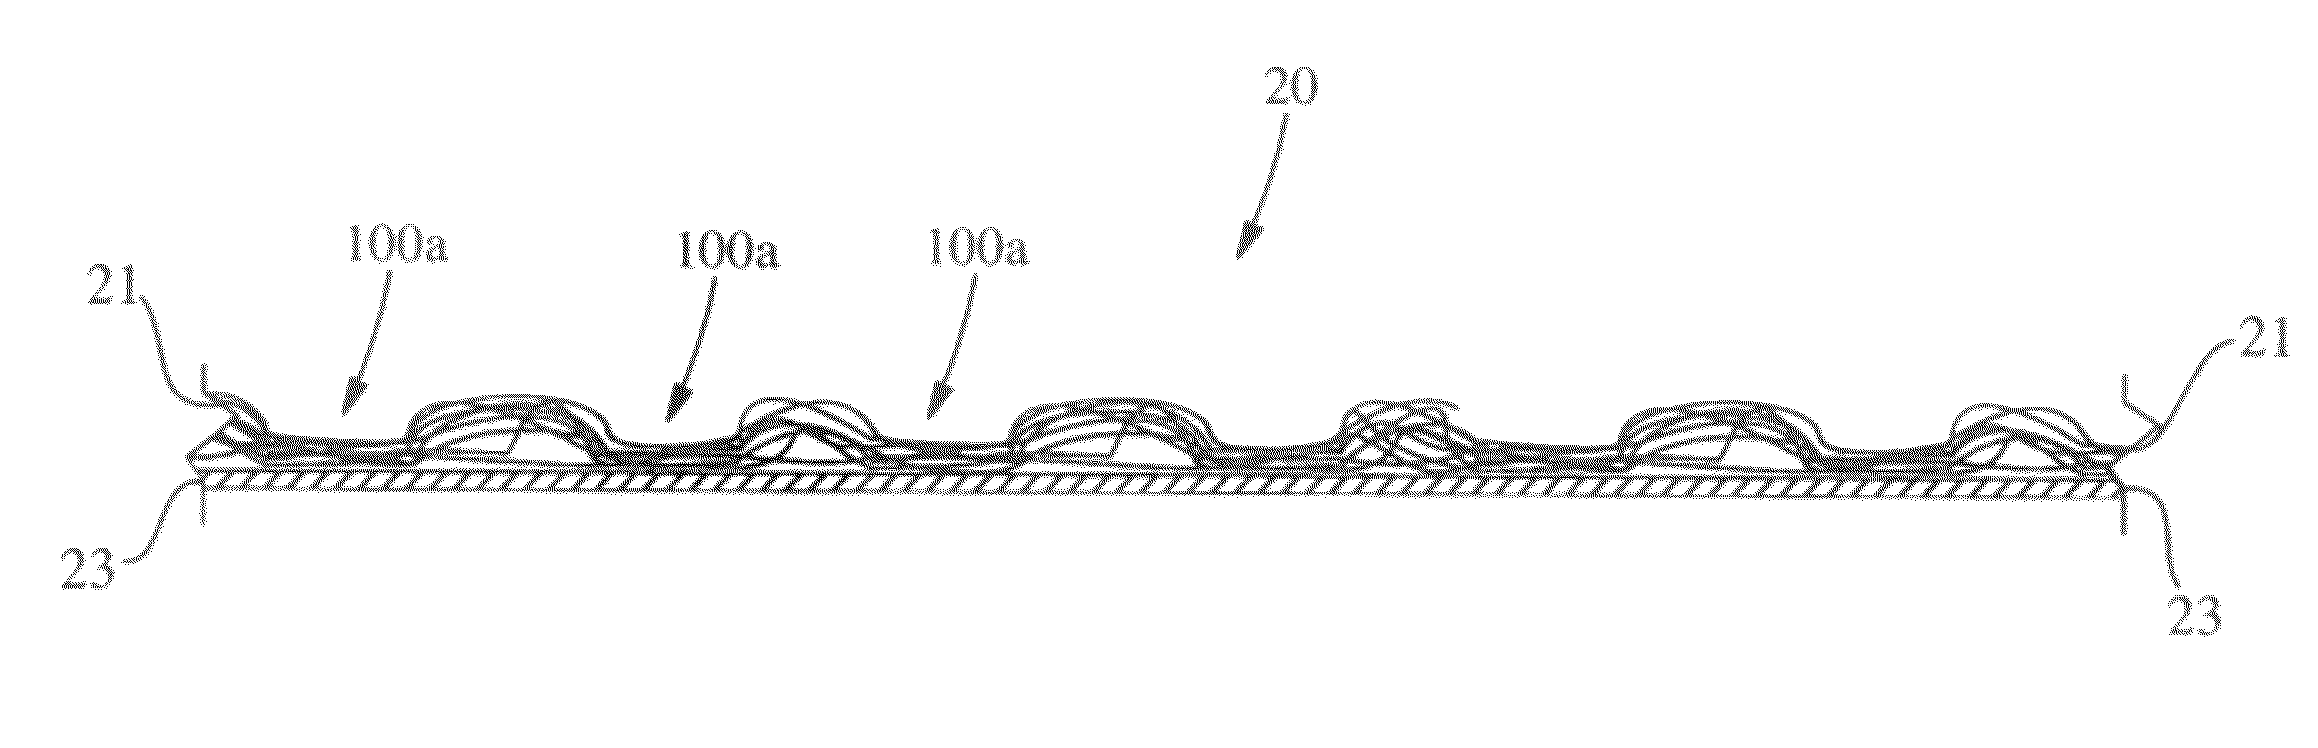 Absorbent article and components thereof having improved softness signals, and methods for manufacturing